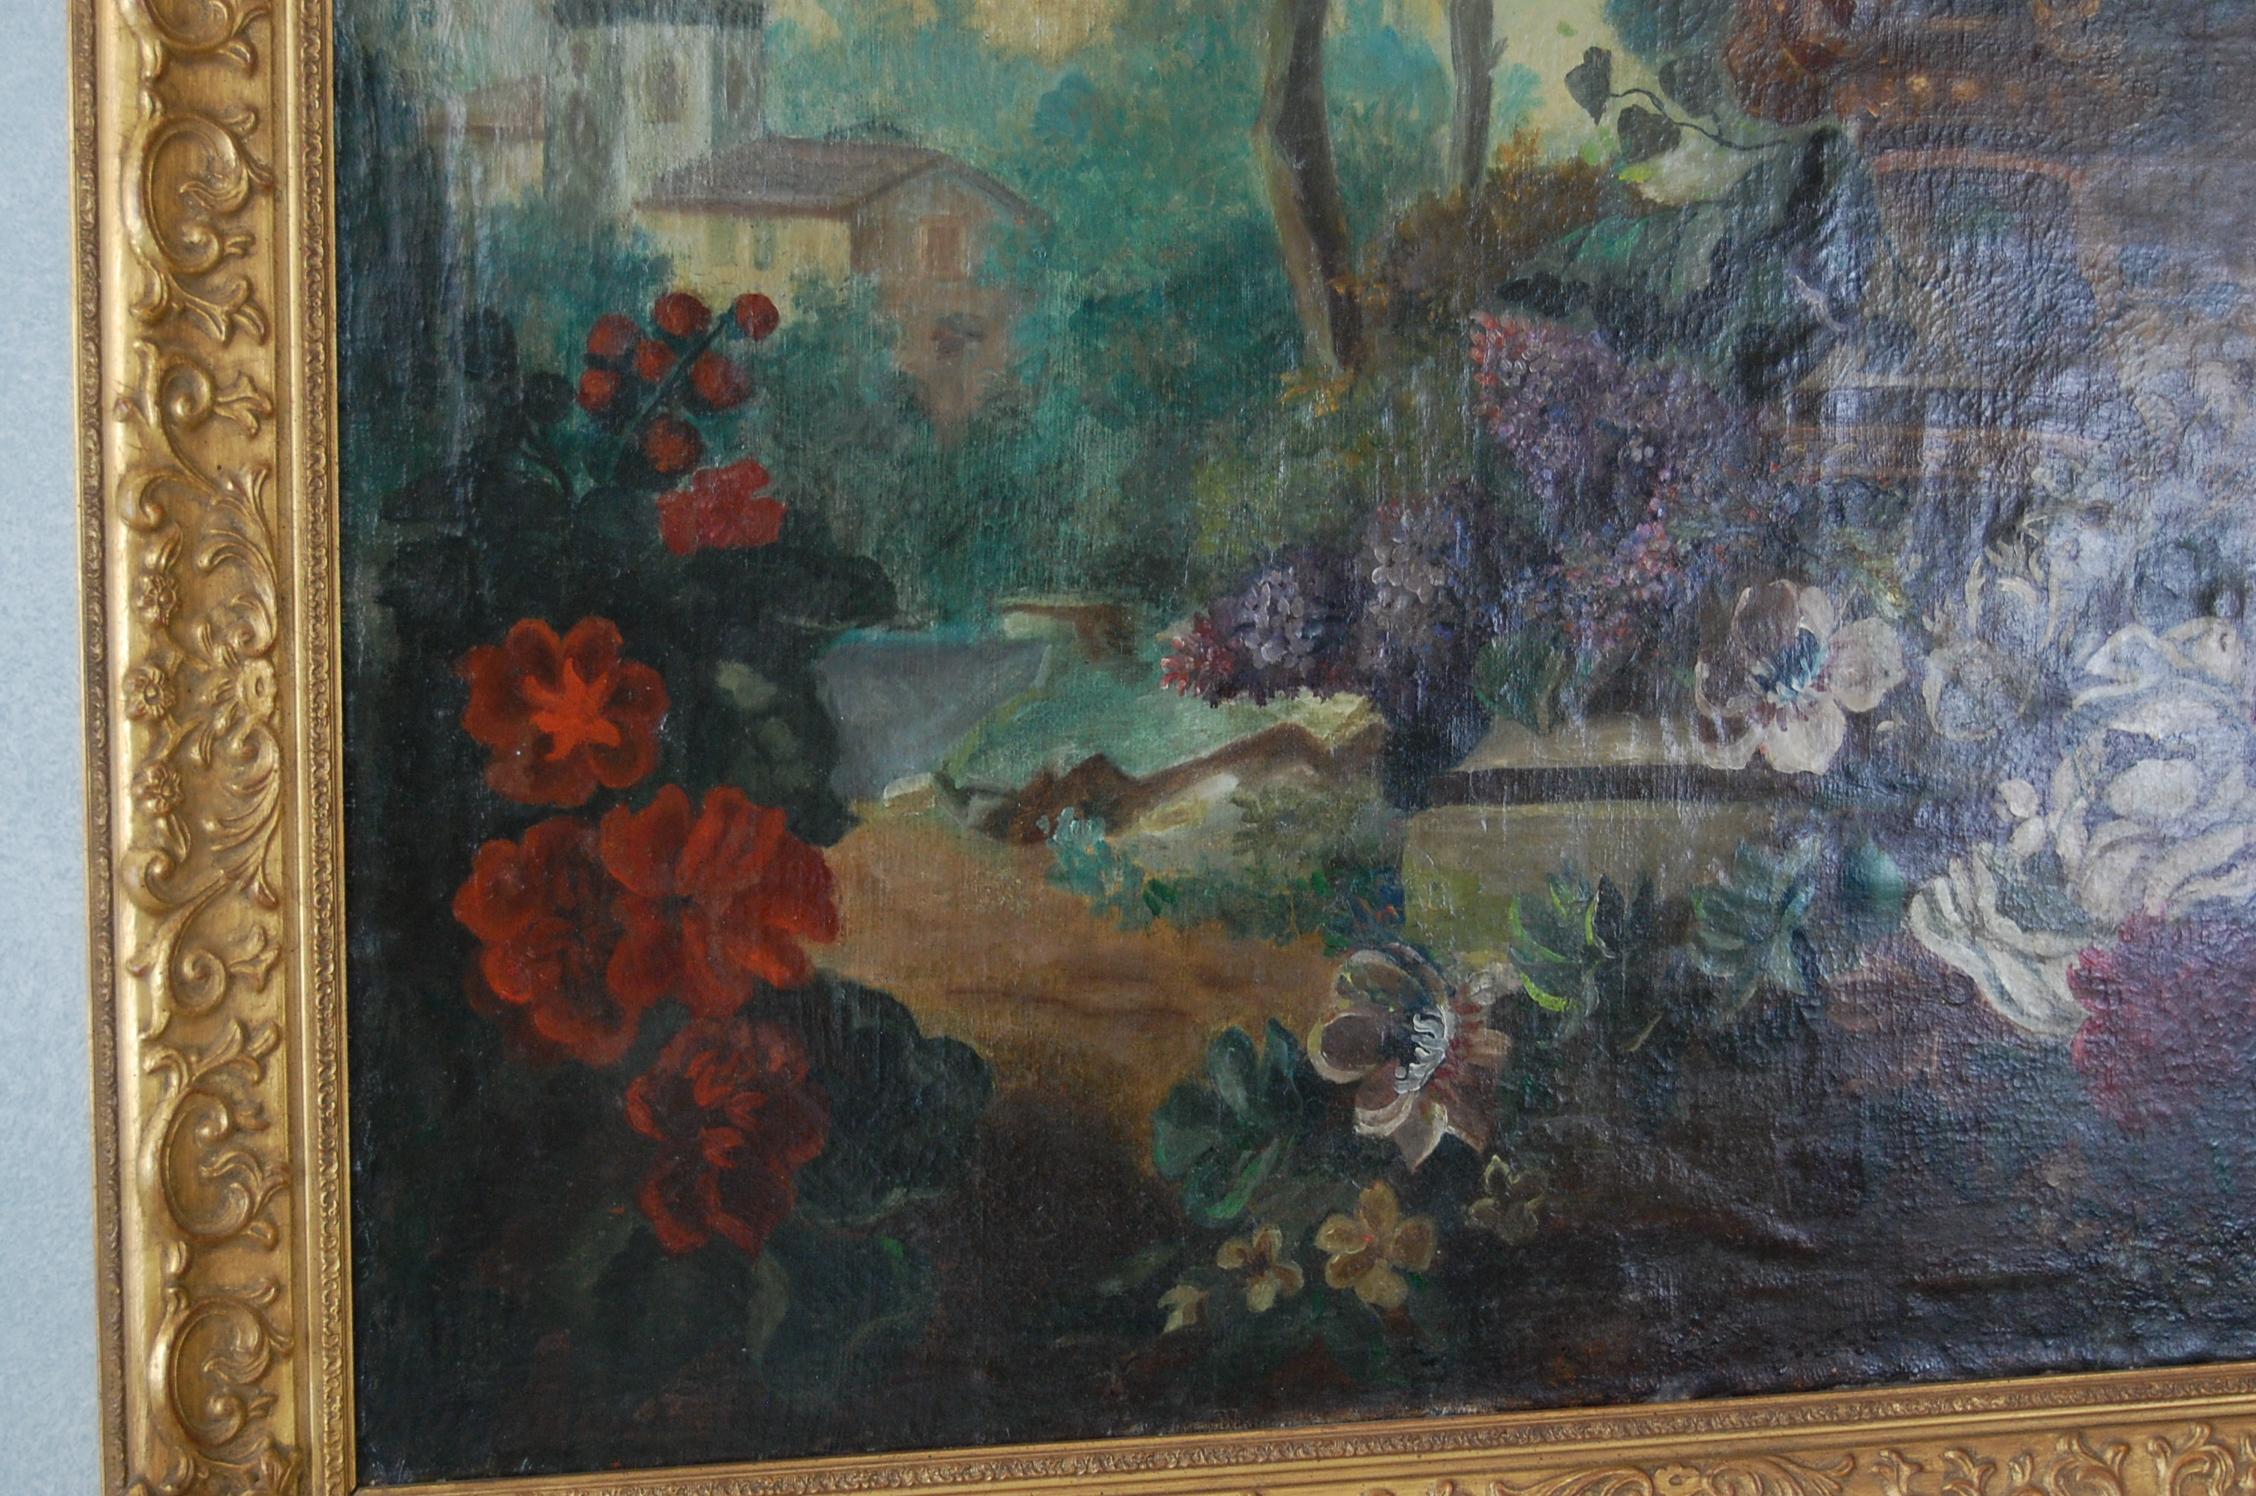 Hand-Painted Large Scale Floral Painting of Urn in a Landscape, Dutch, 19th Century